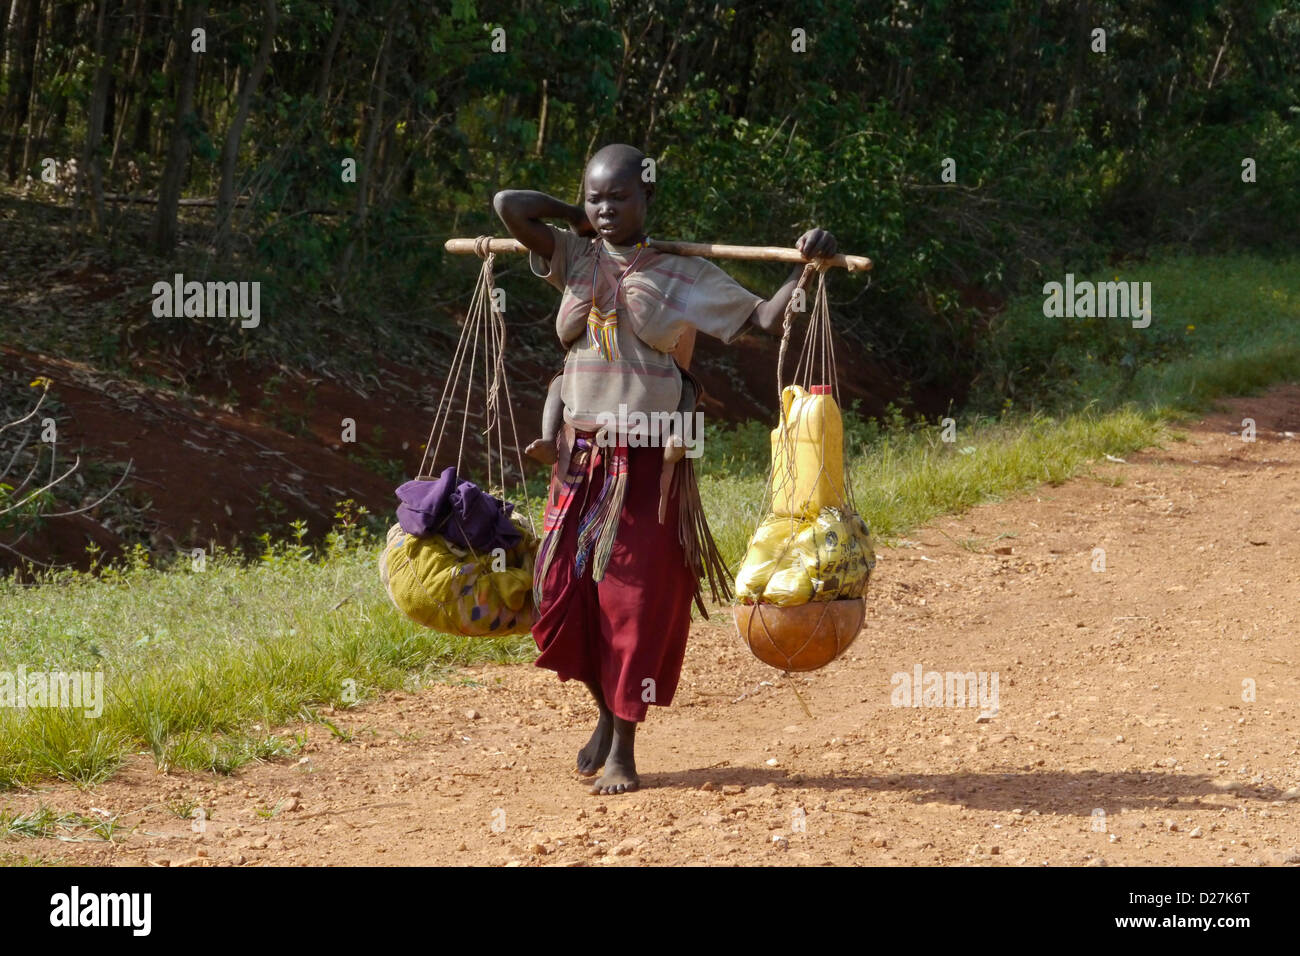 ETHIOPIA On the road between Chagni and Debate, Beni Shangul Gumuz region. Gumuz woman carrying goods to or from market. Stock Photo